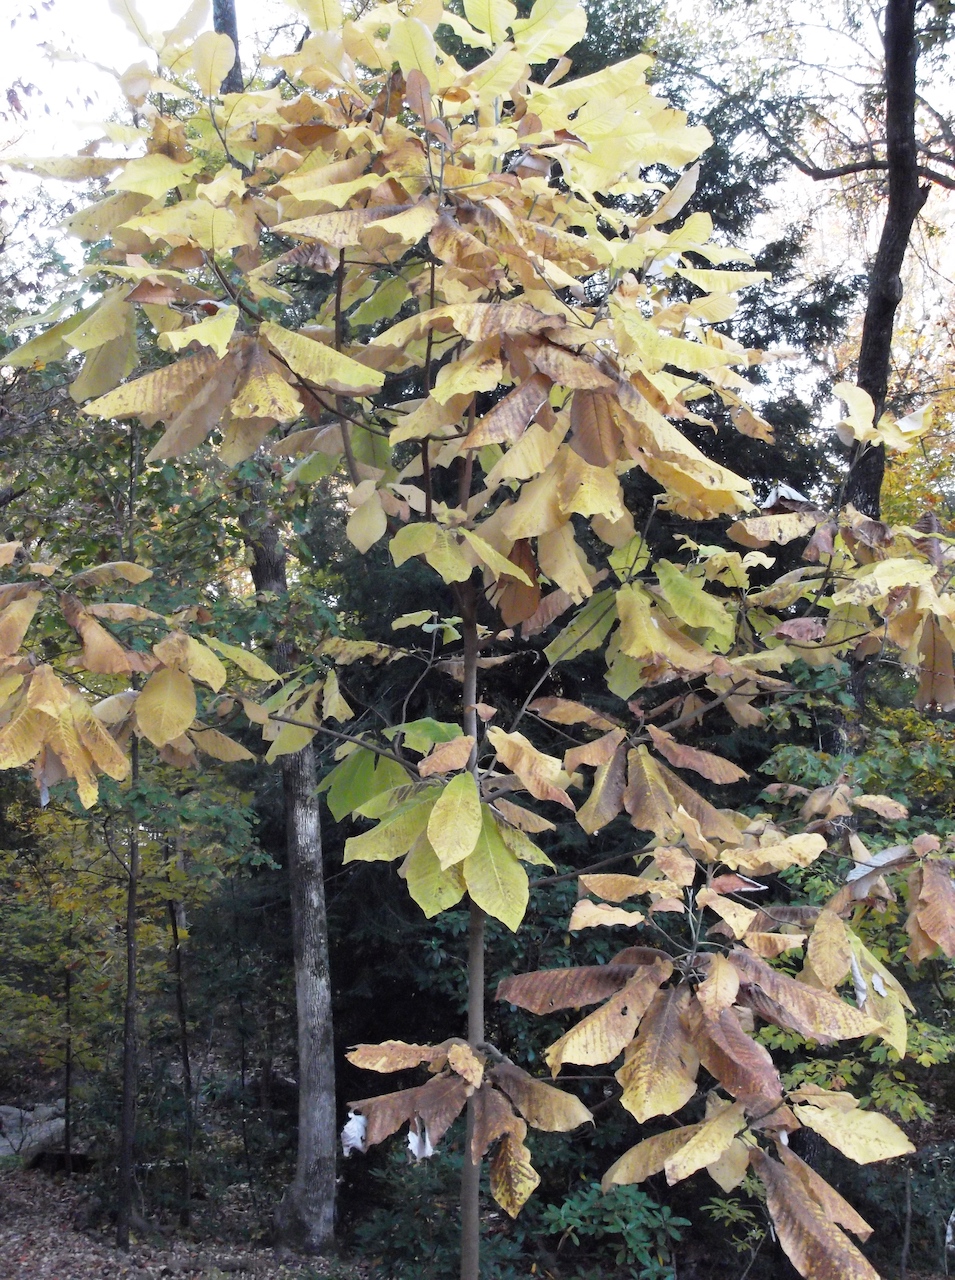 The Scientific Name is Magnolia macrophylla. You will likely hear them called Big Leaf Magnolia, Large-leaved Cucumber Tree . This picture shows the Fall color of Magnolia macrophylla